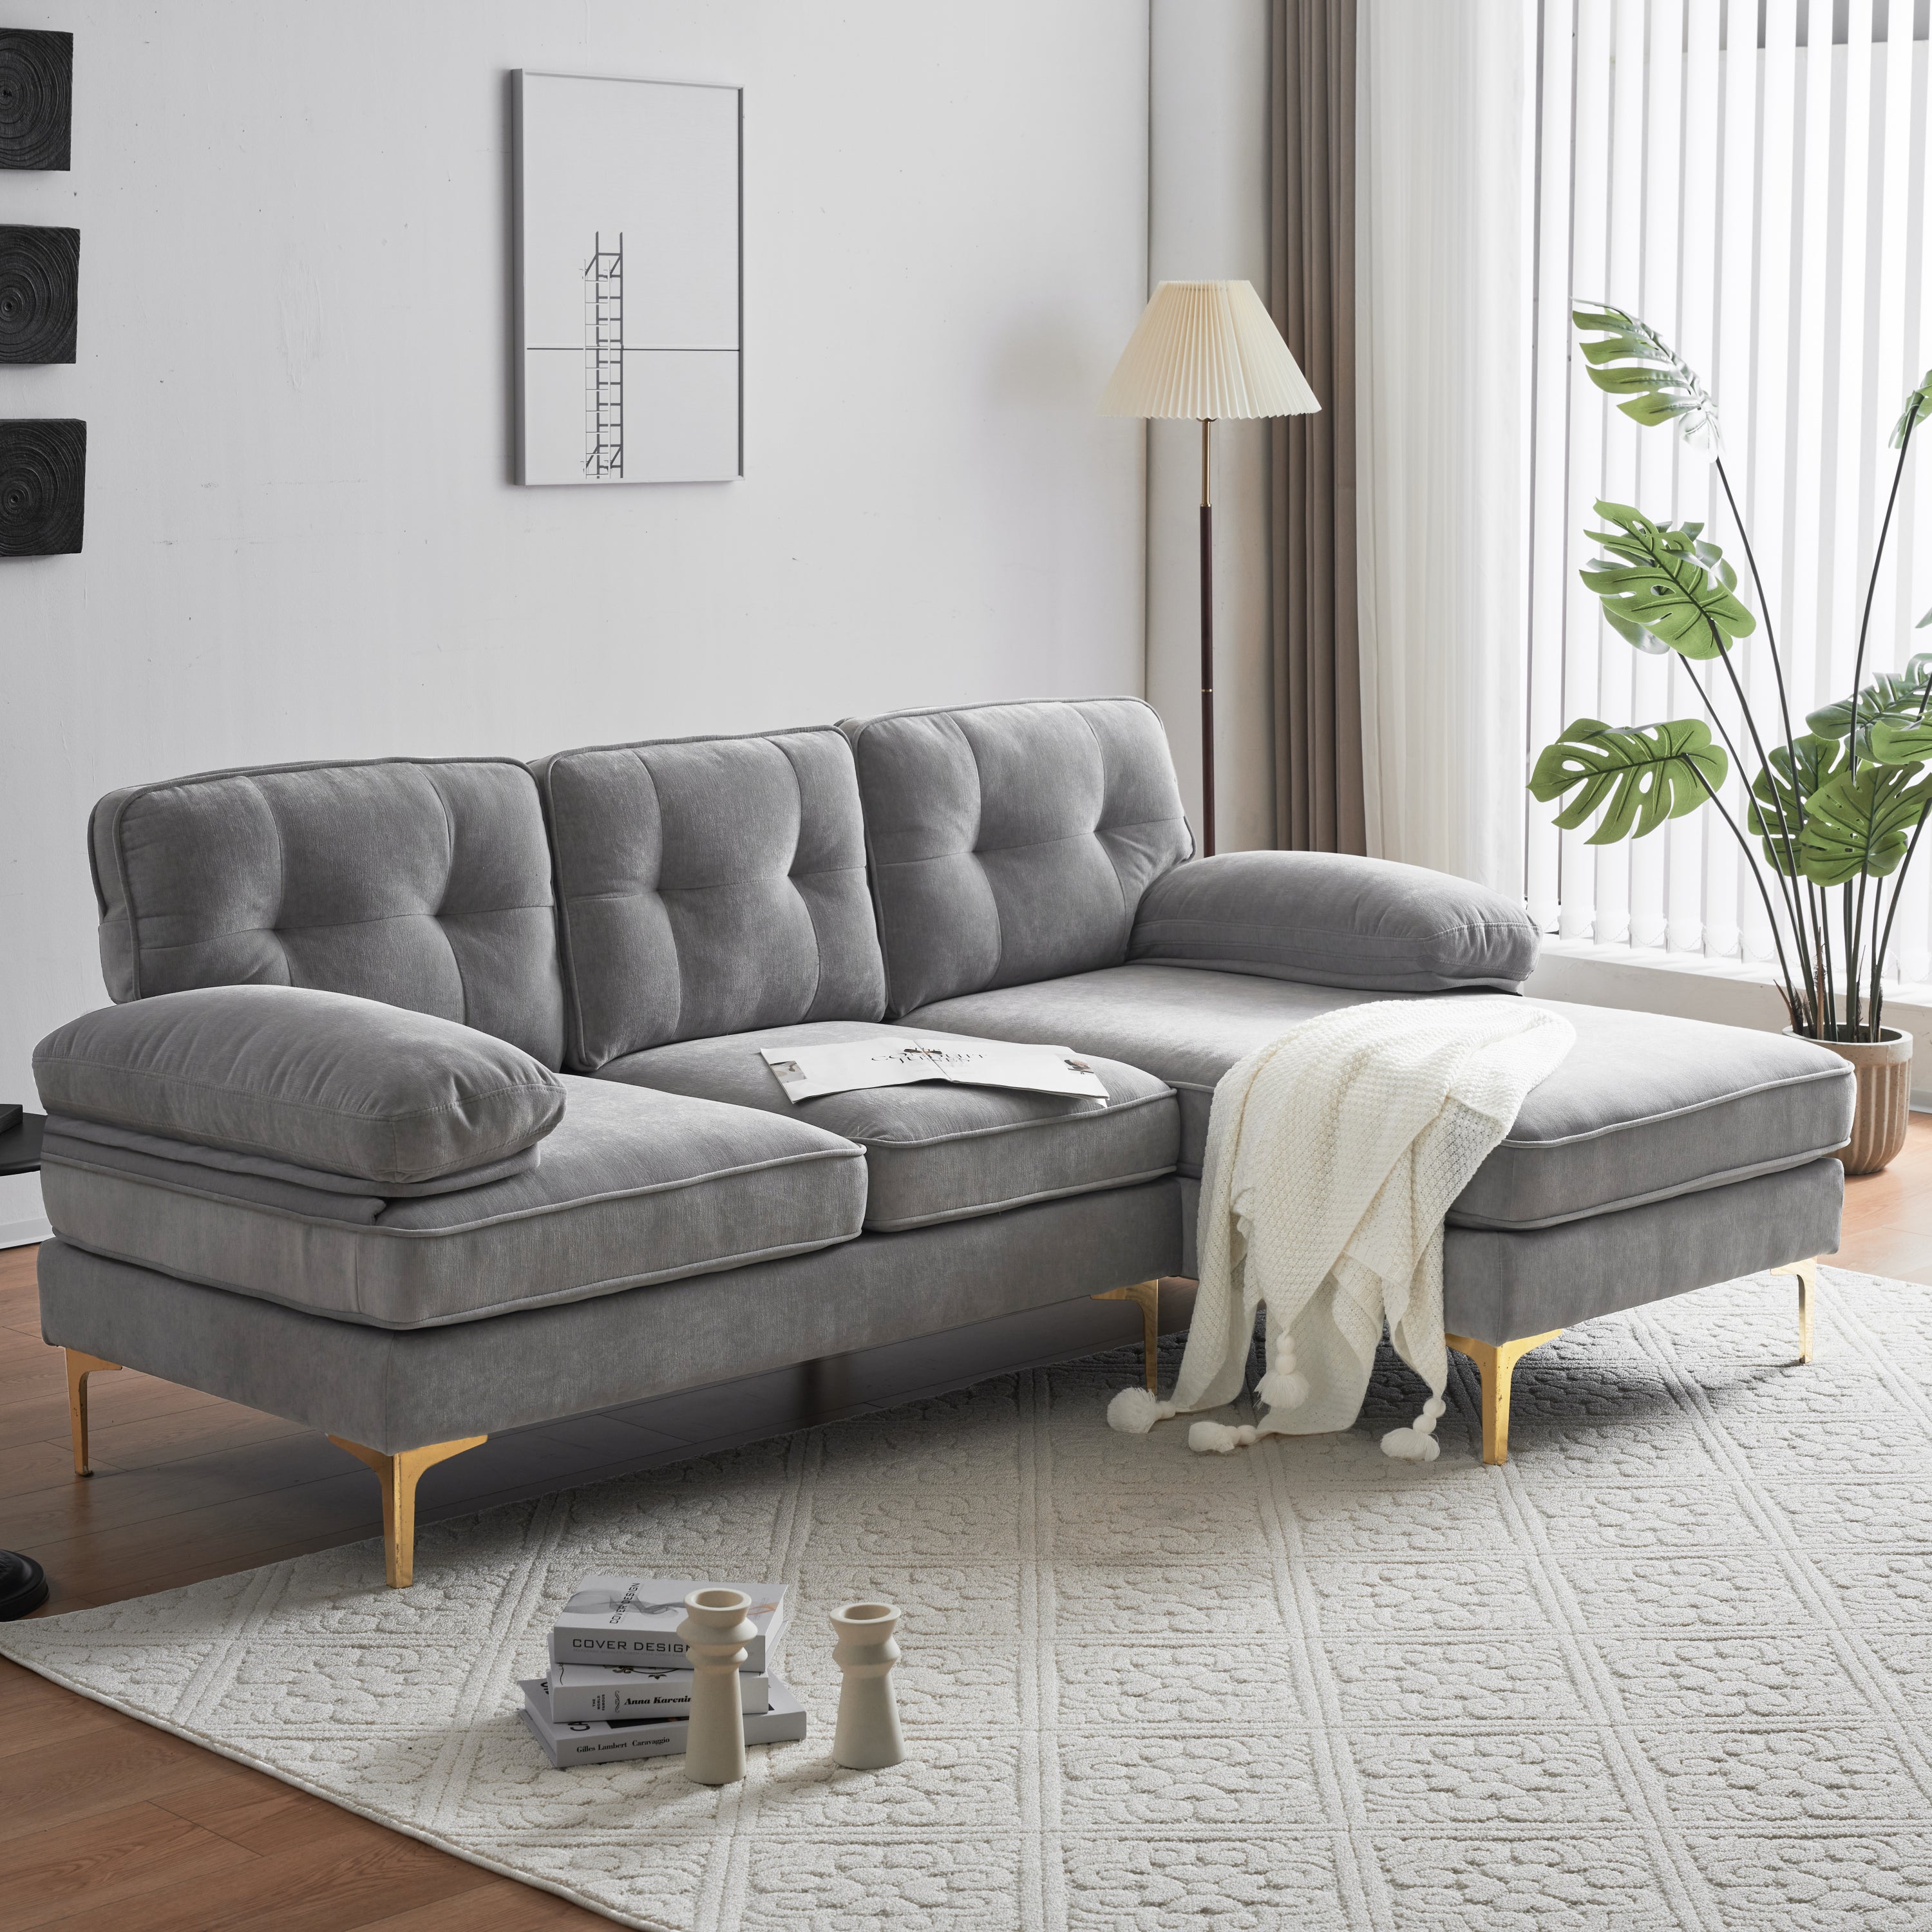 Modern Velvet L-Shaped Sectional Sofas for Living Room, Bedroom | Light Grey | Stylish and Comfortable Addition to Your Home Decor-Stationary Sectionals-American Furniture Outlet